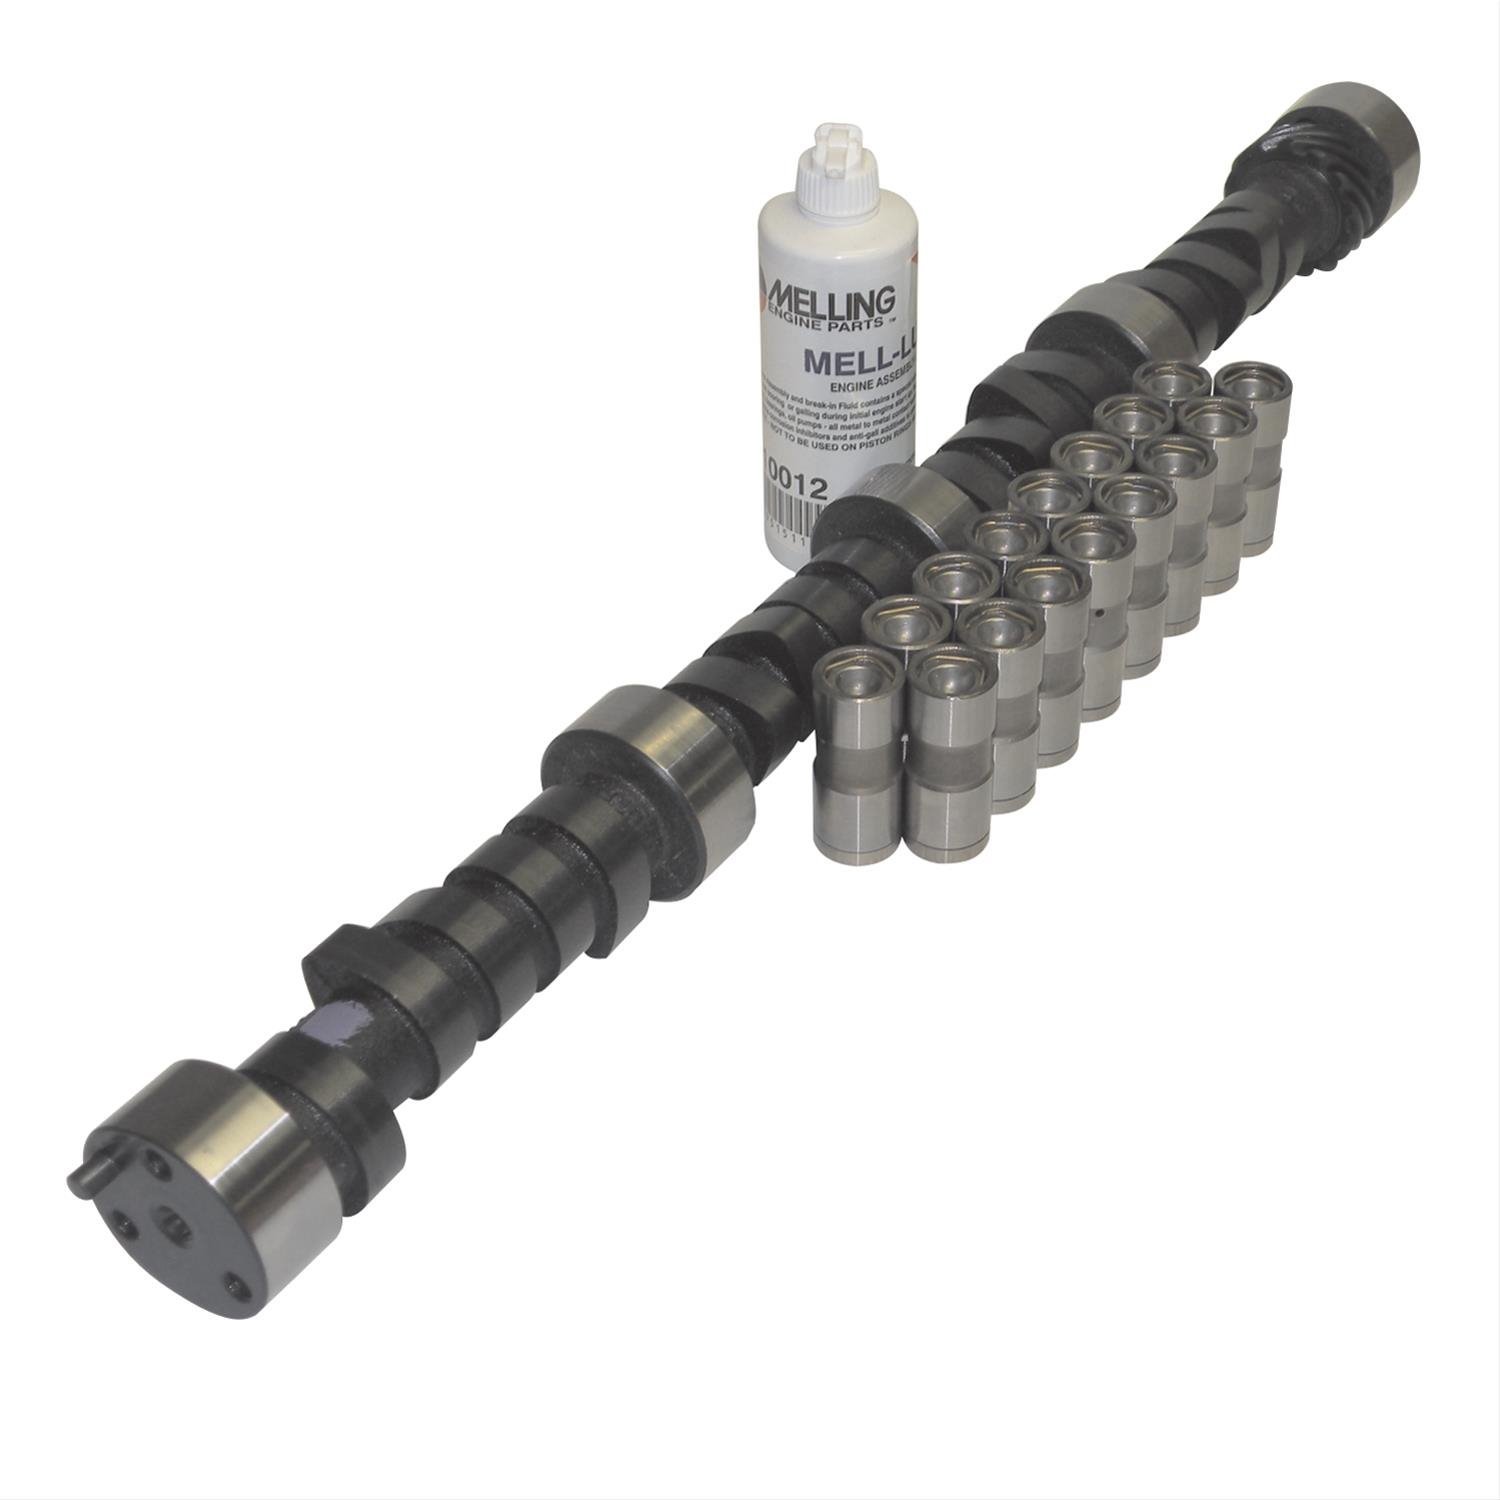 Camshaft and Lifter Kit for Select 1957-1996 GM